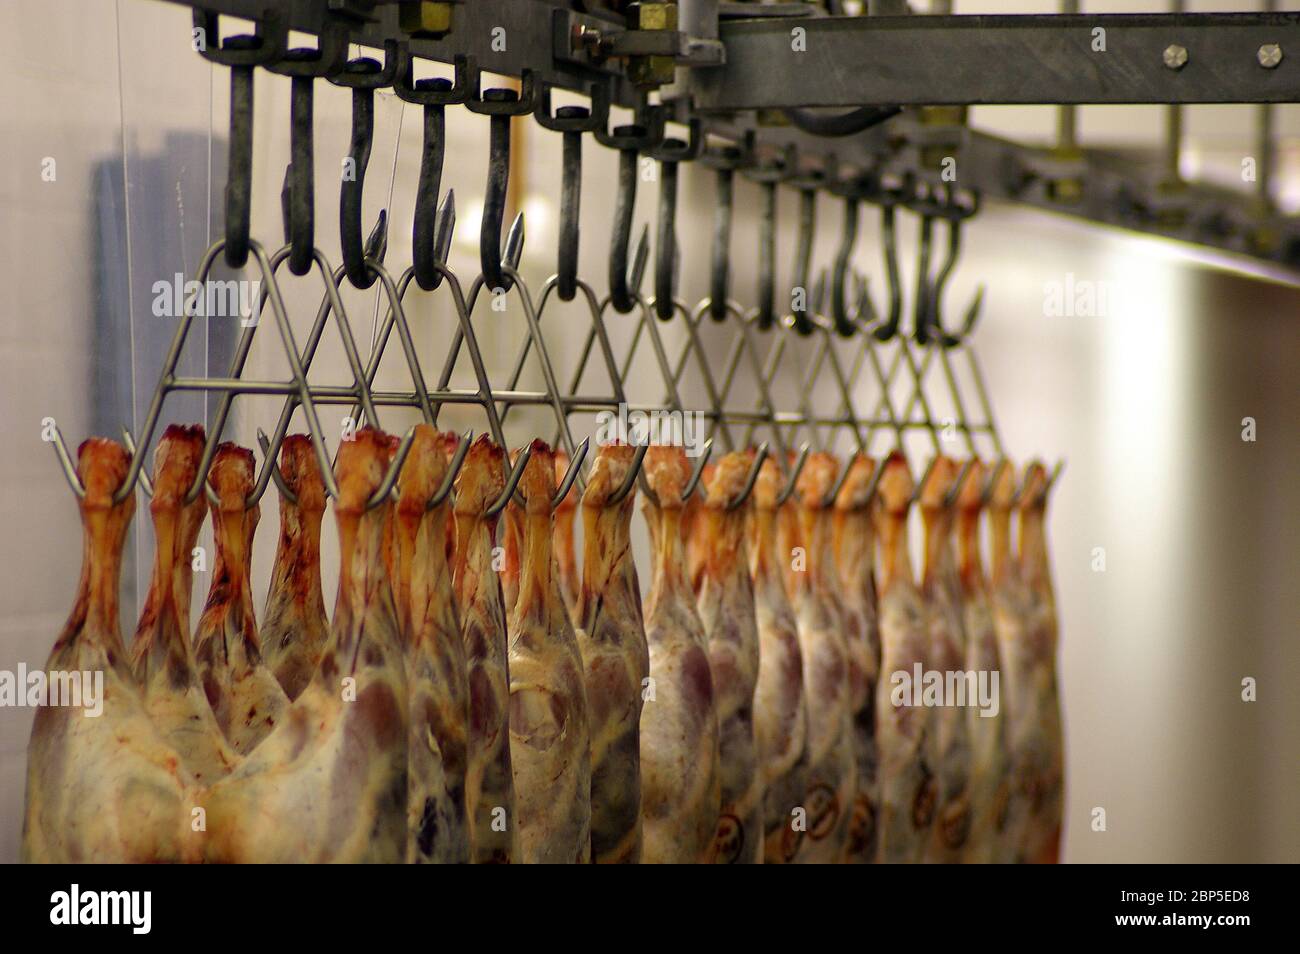 https://c8.alamy.com/comp/2BP5ED8/lamb-hanging-from-meat-hooks-at-a-wholesale-butcher-2BP5ED8.jpg